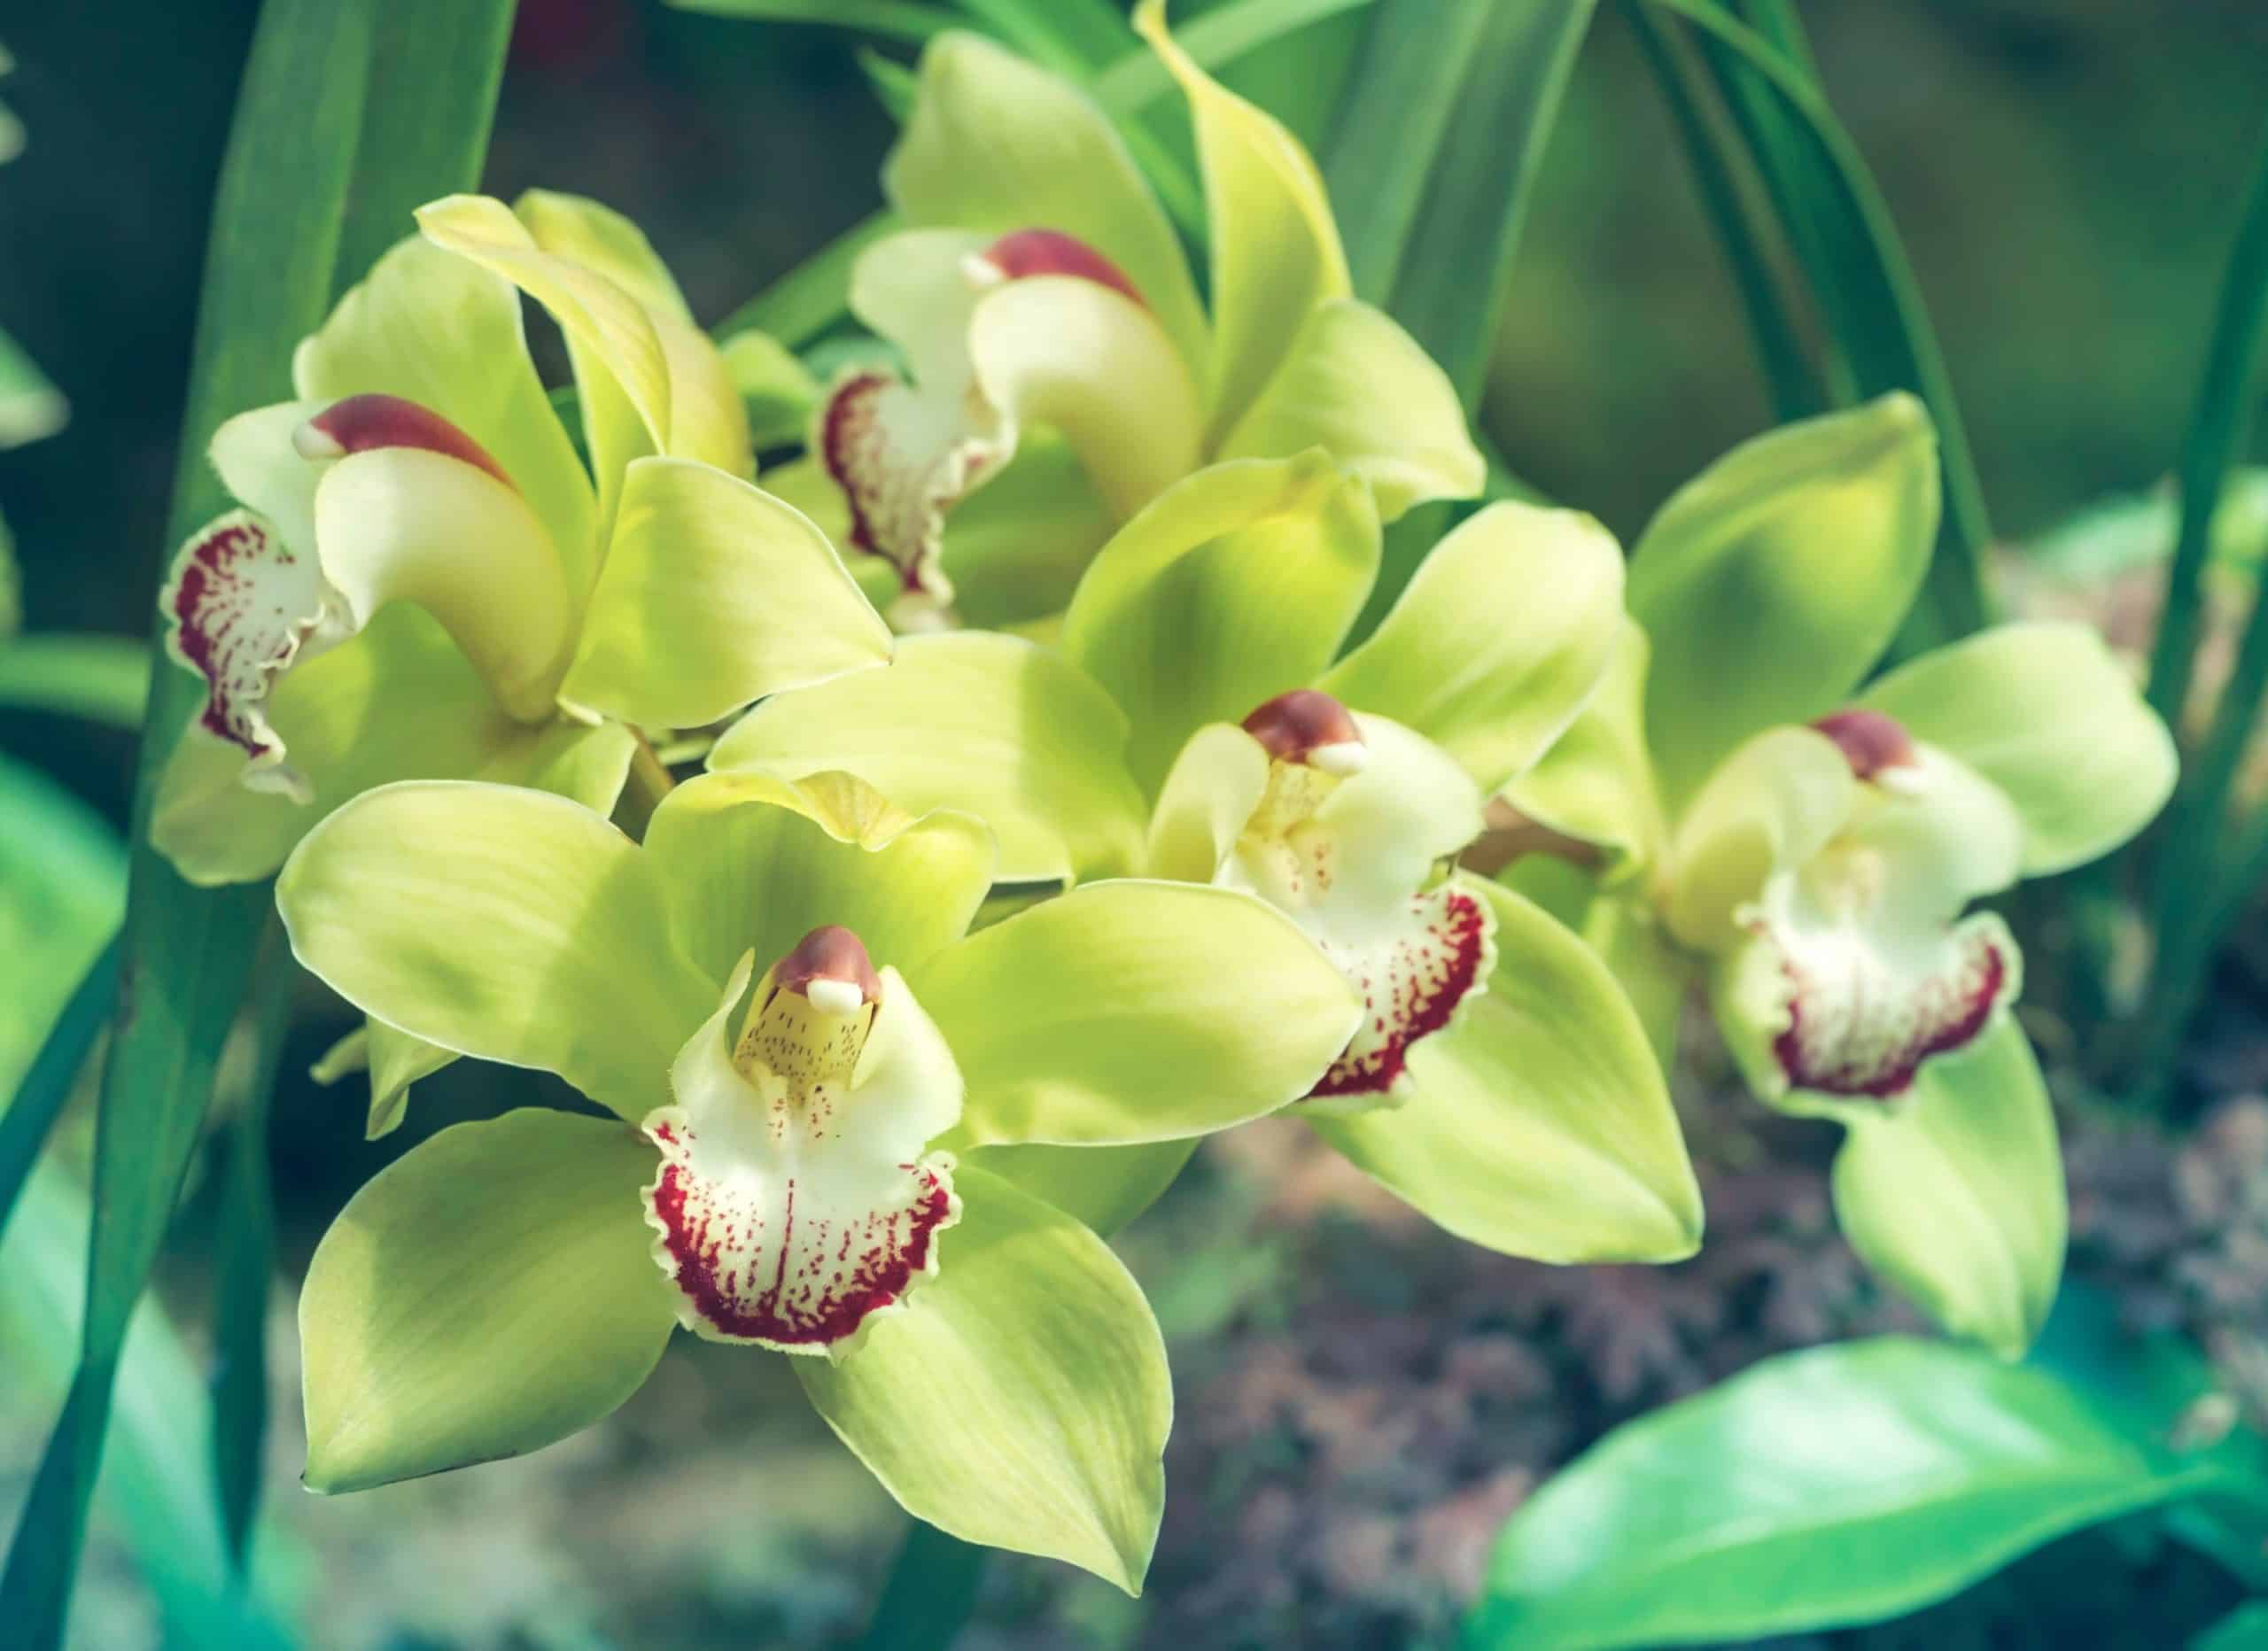 growing orchid plants like this cymbidium orchid plant flowers with green petals is easy 